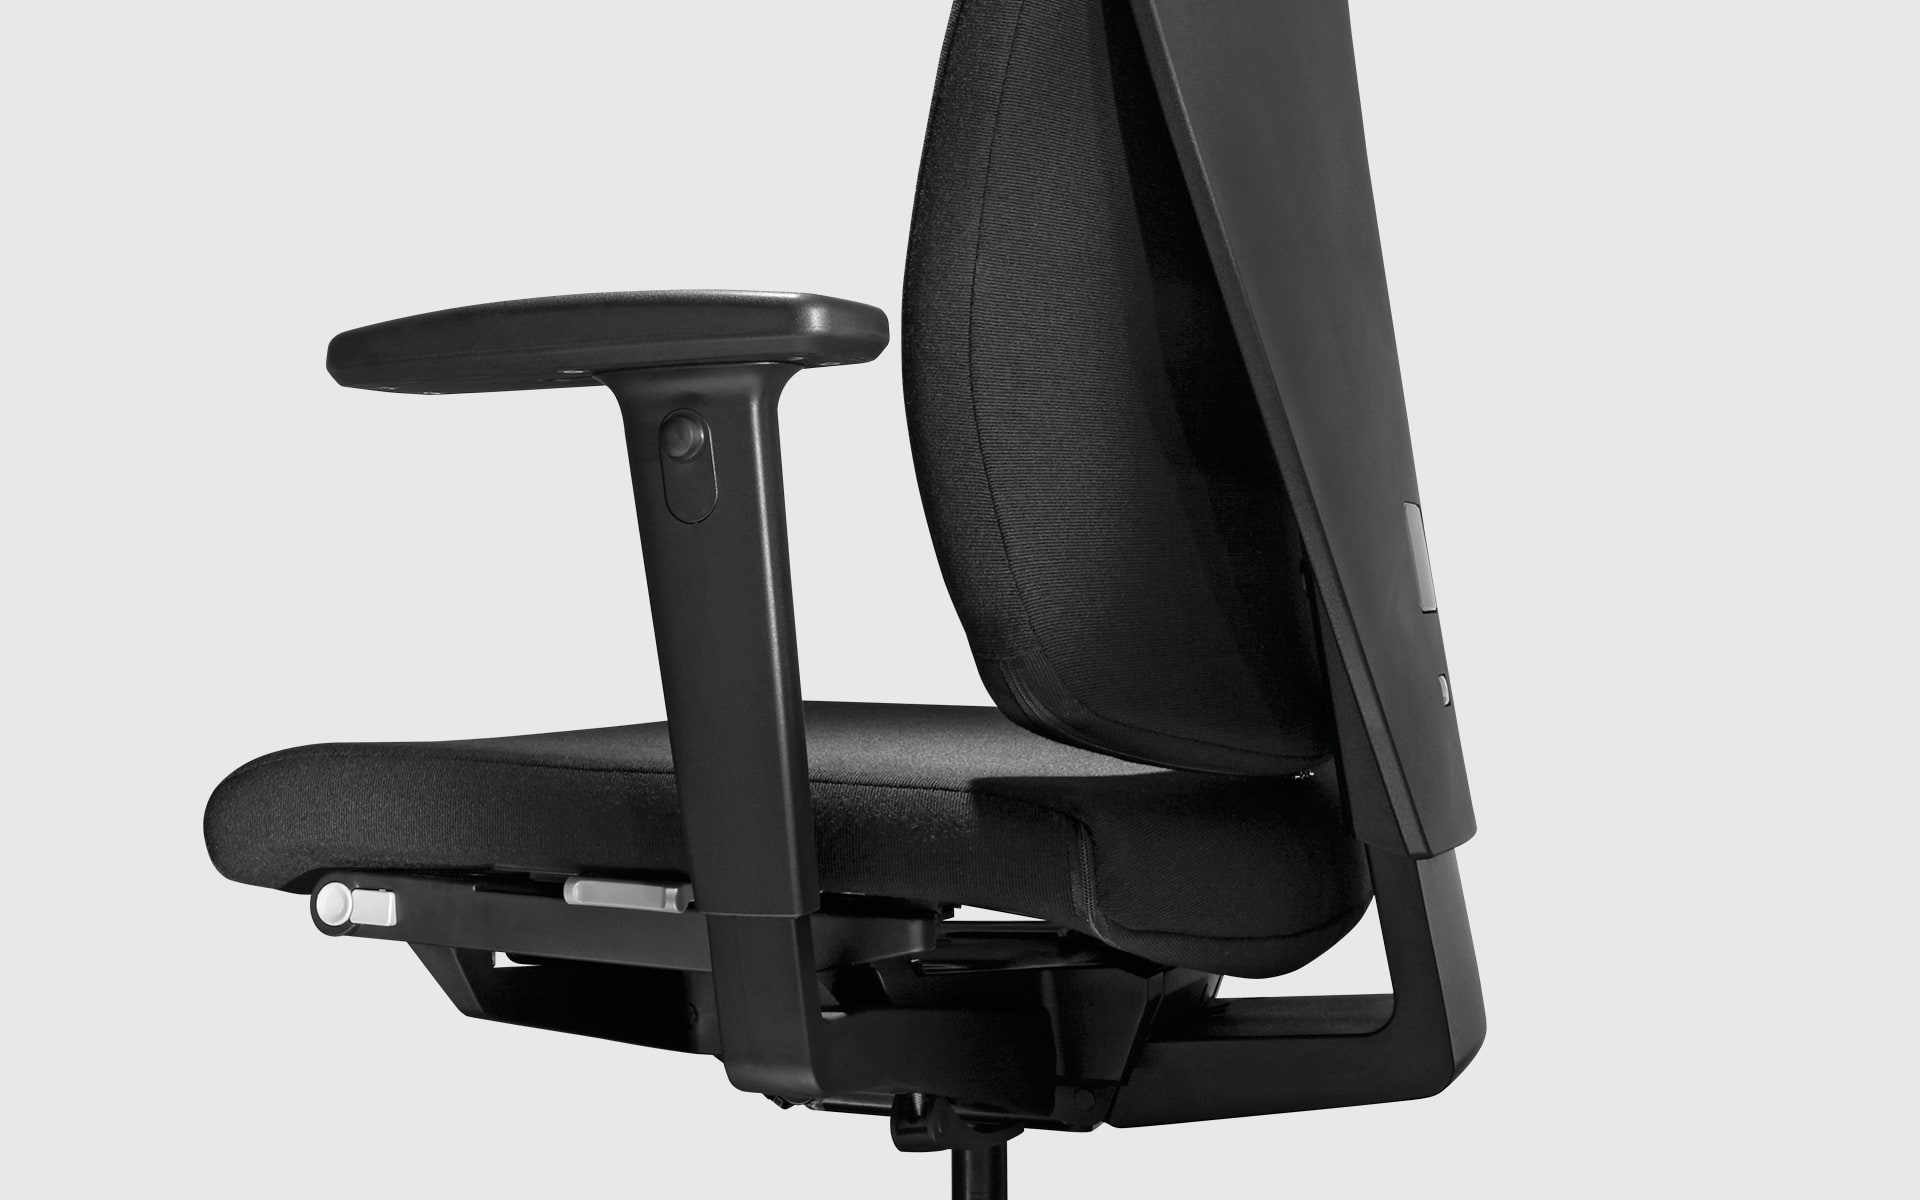 Close-up of the K+N Signeta office chair by ITO Design in black